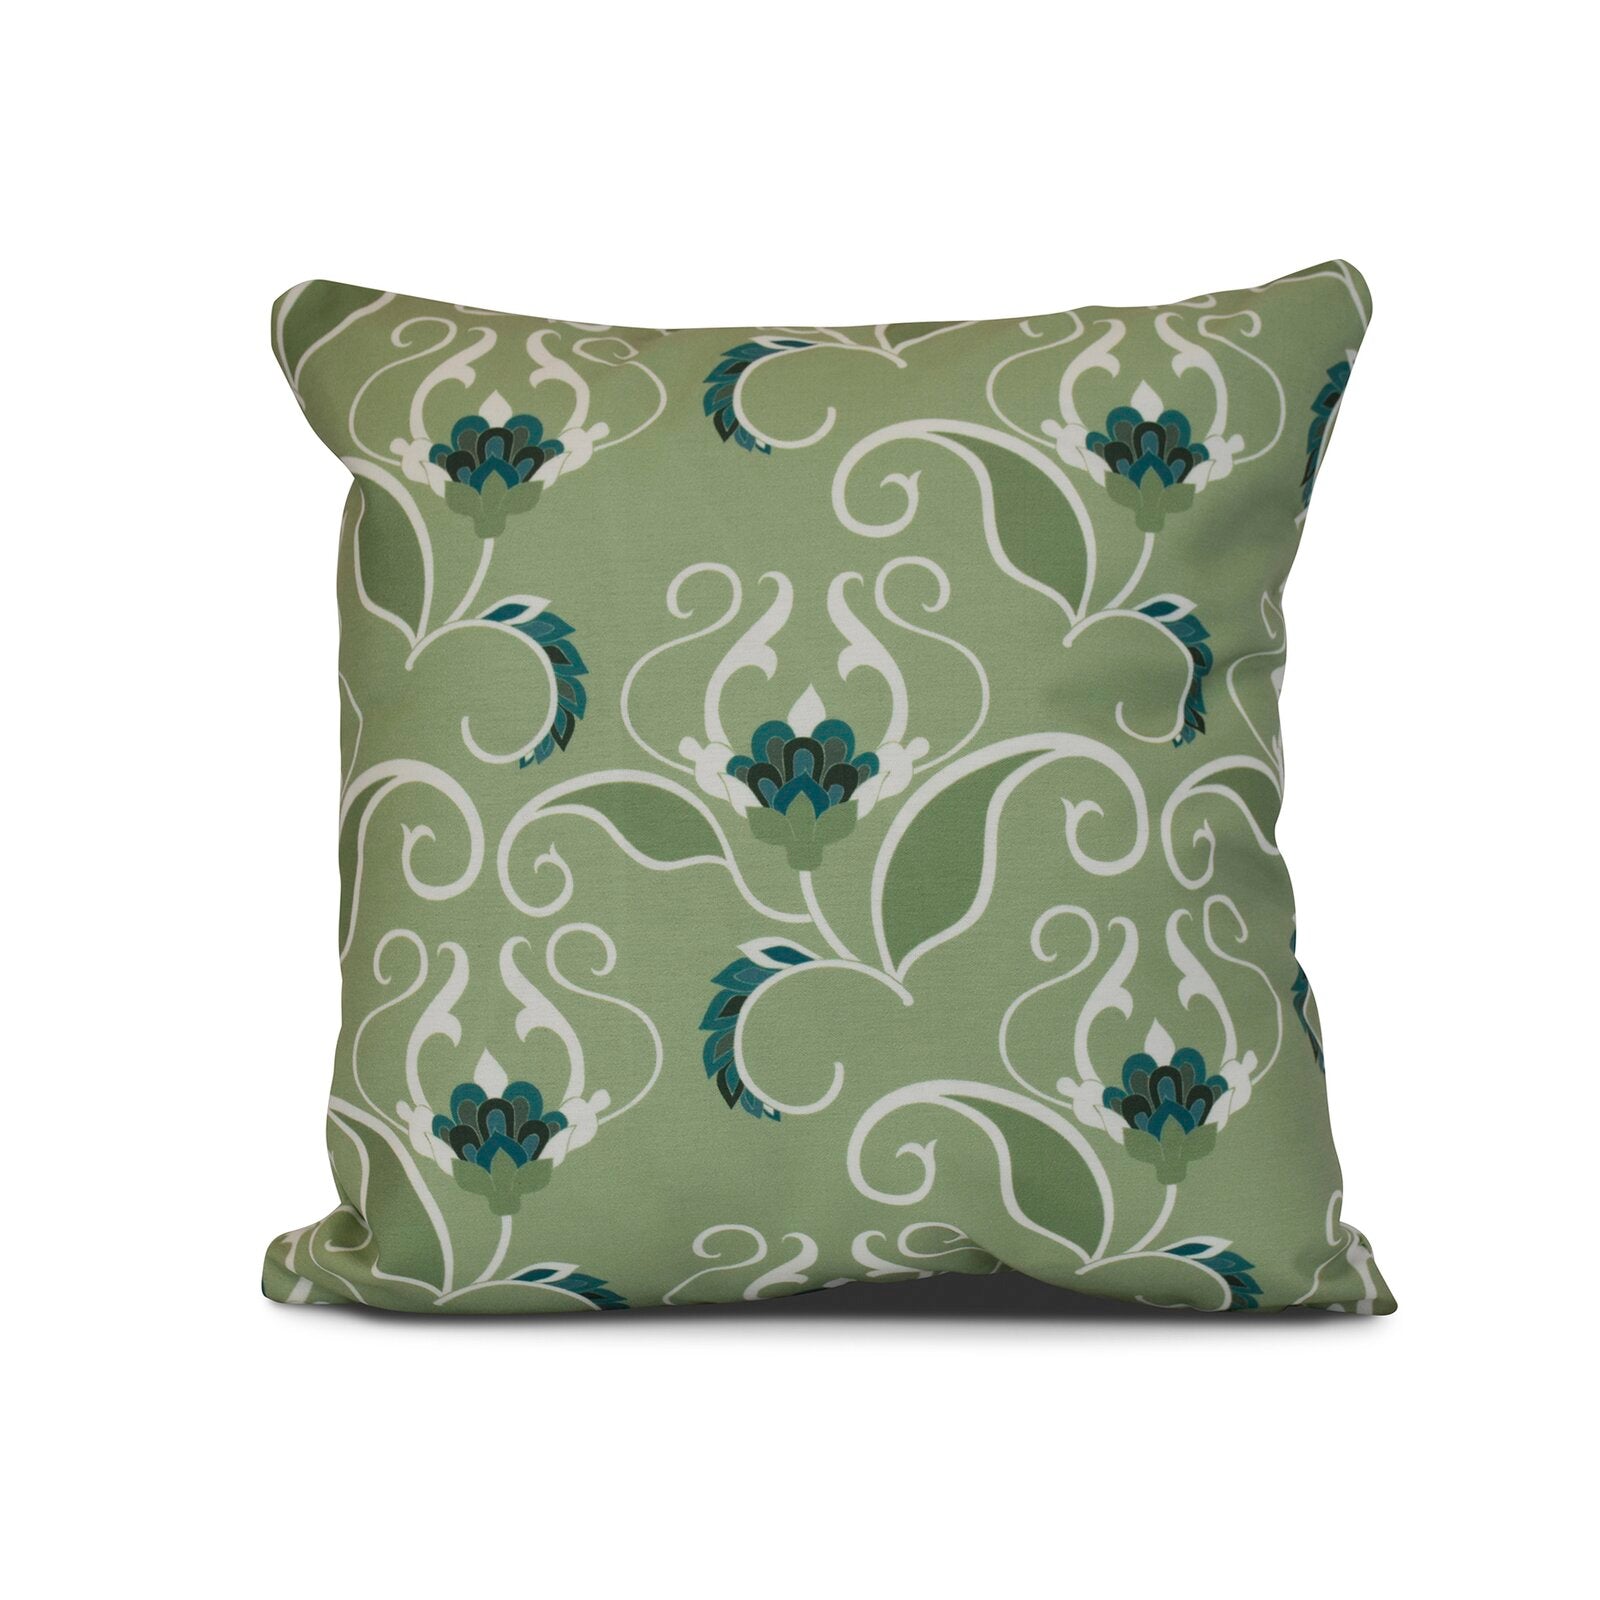 16" H x 16" W x 3" D Green Tisa Outdoor Square Pillow Cover & Insert SC344